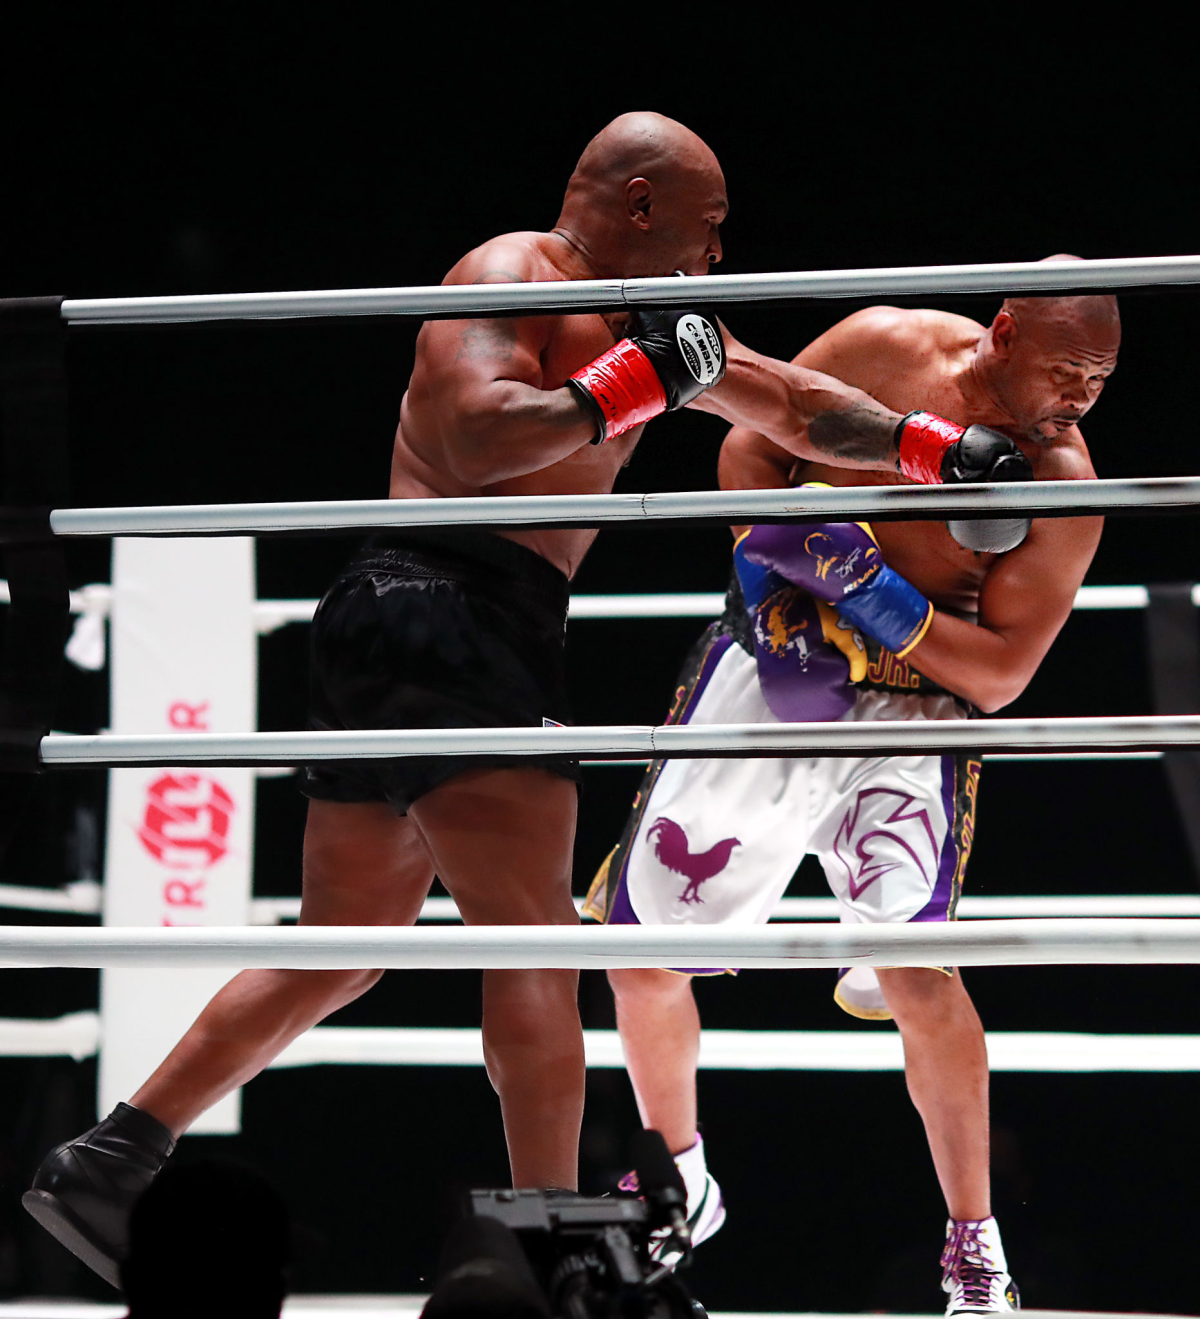 Mike Tyson throws a punch at Roy Jones Jr. during their exhibition fight at Staples Center on Saturday.